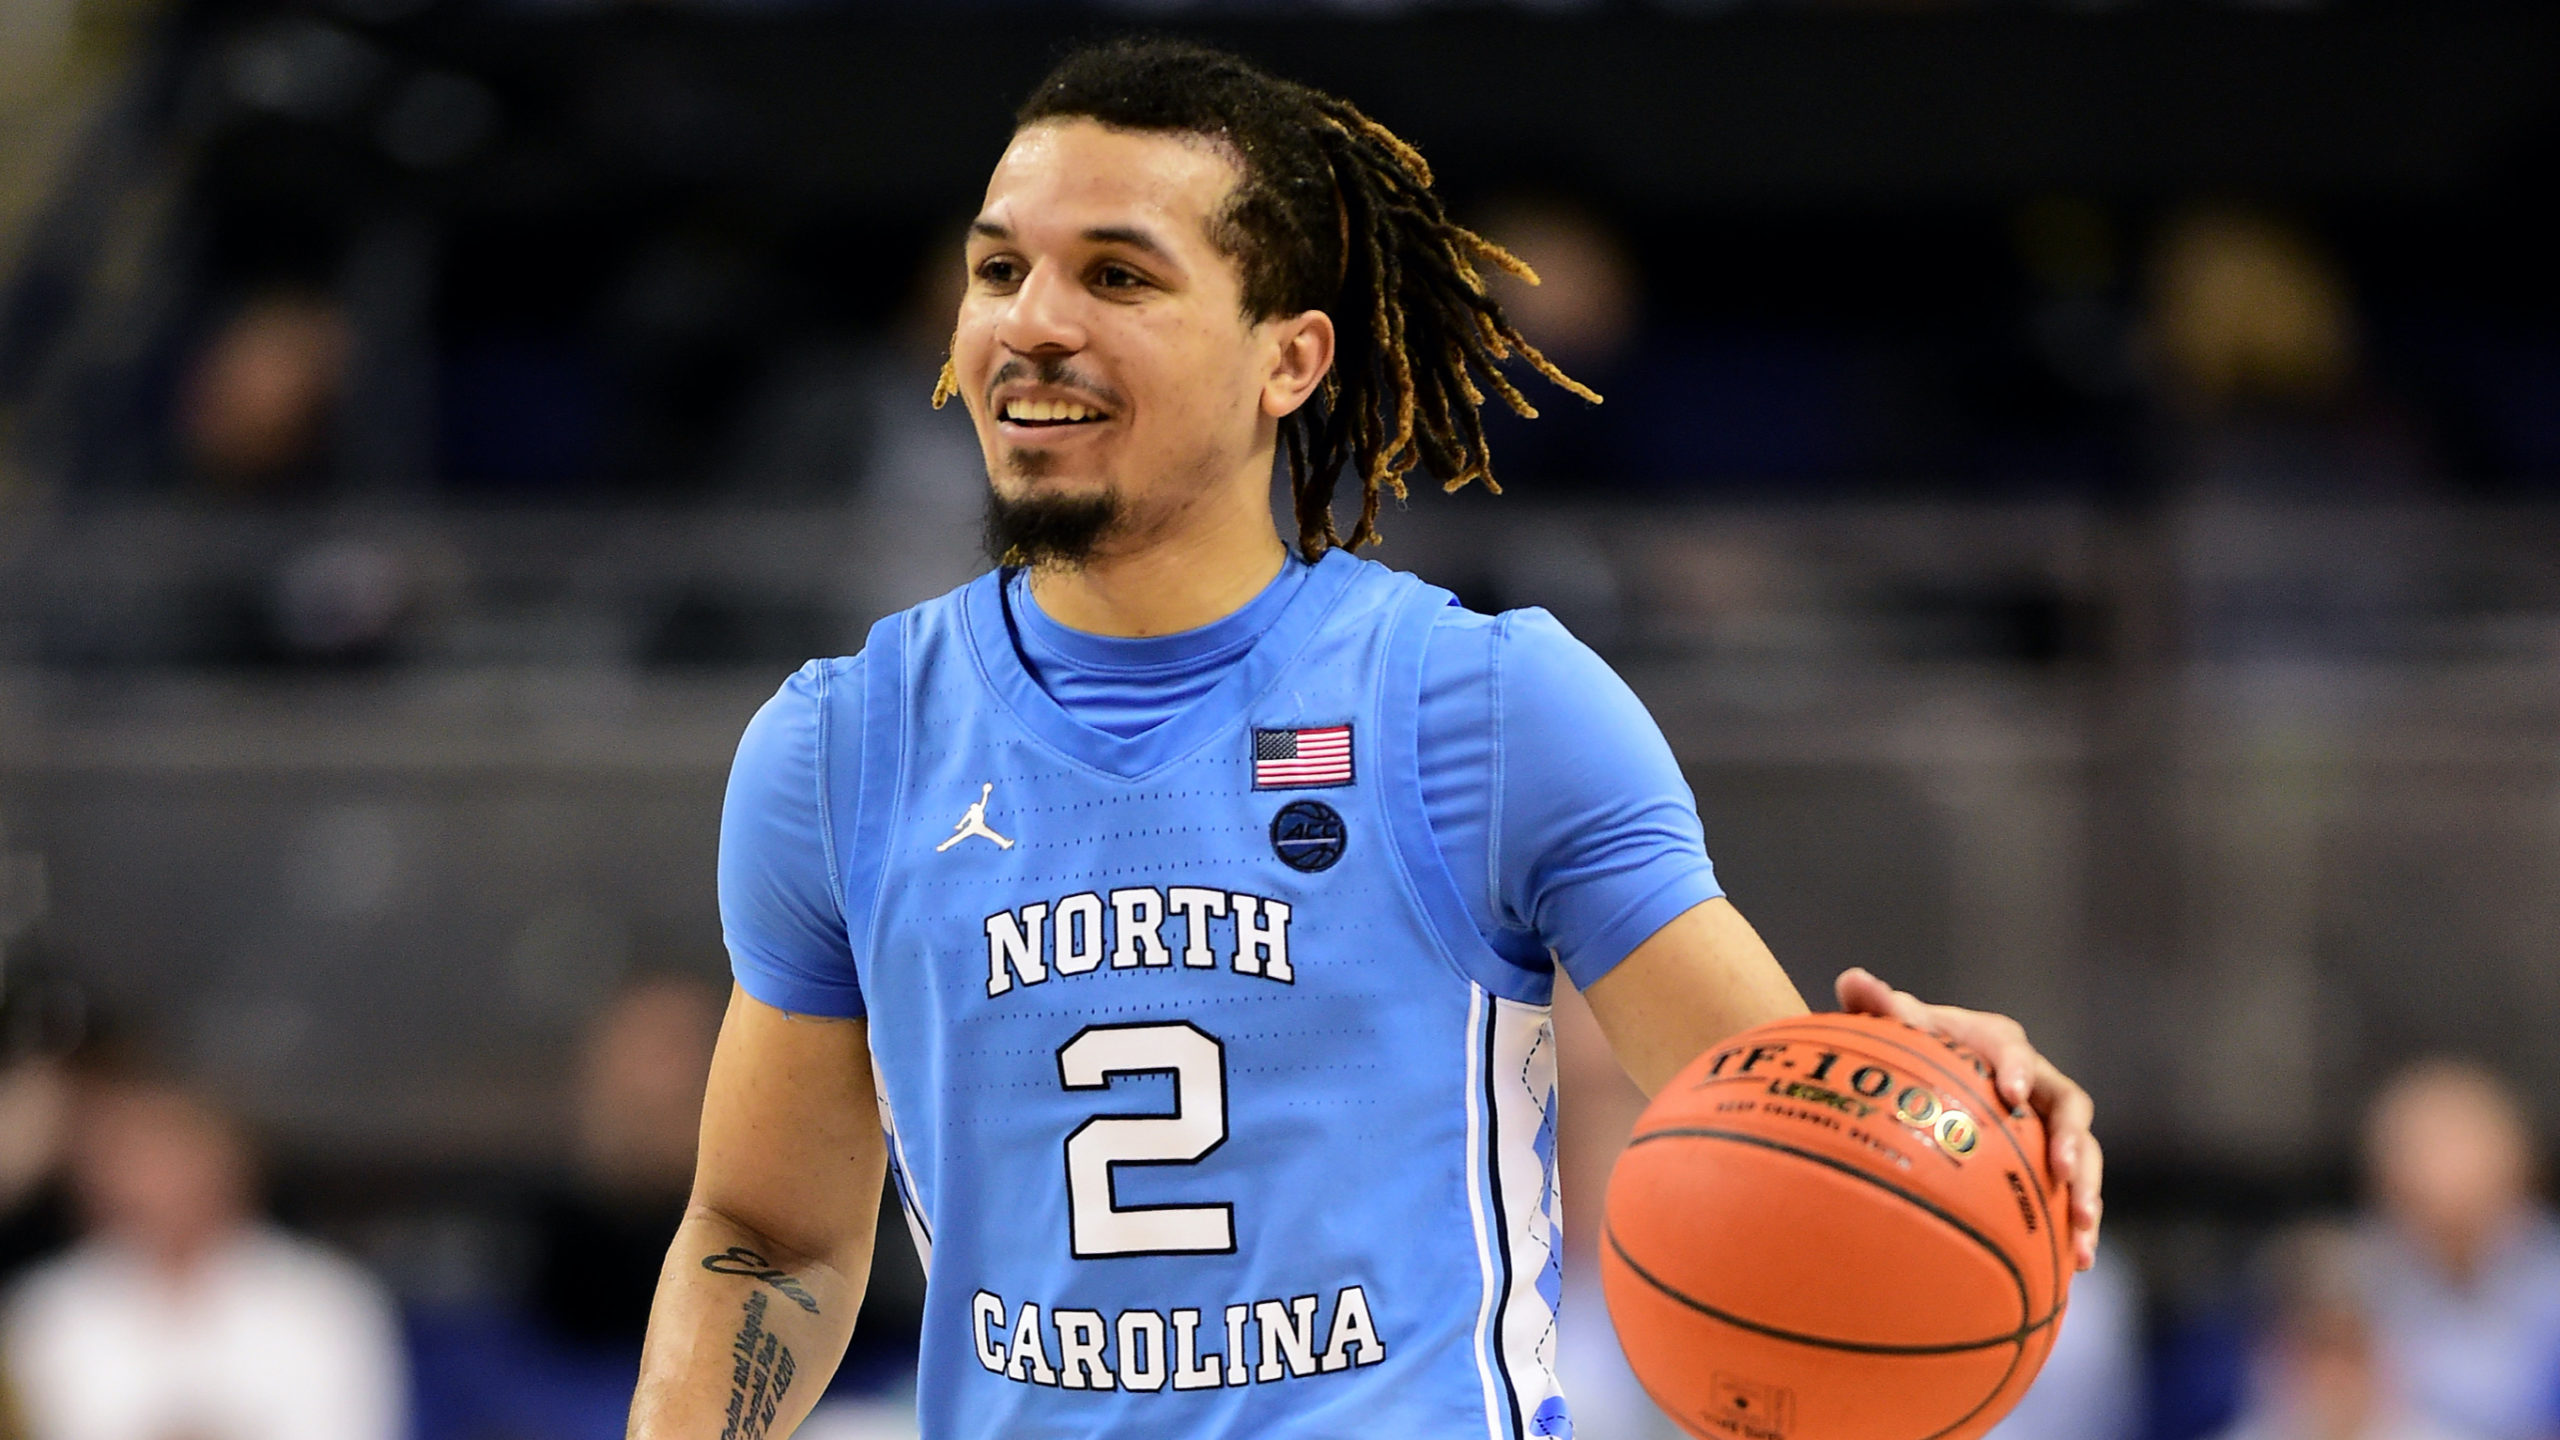 Anderson Magic's Cole Anthony Now a Serious Rookie of the Year Candidate